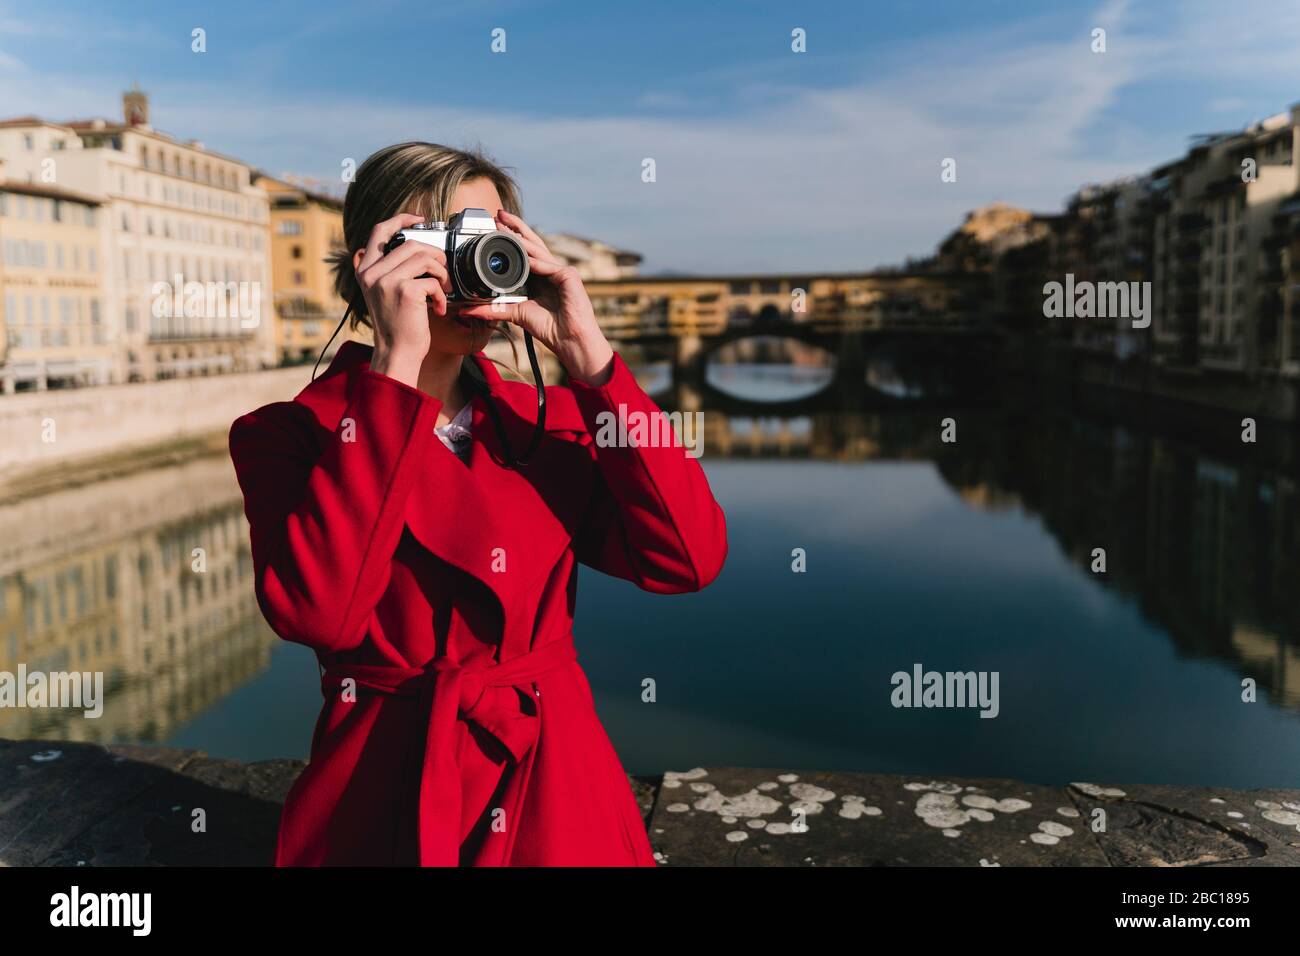 Young woman taking a picture on a bridge above river Arno, Florence, Italy Stock Photo